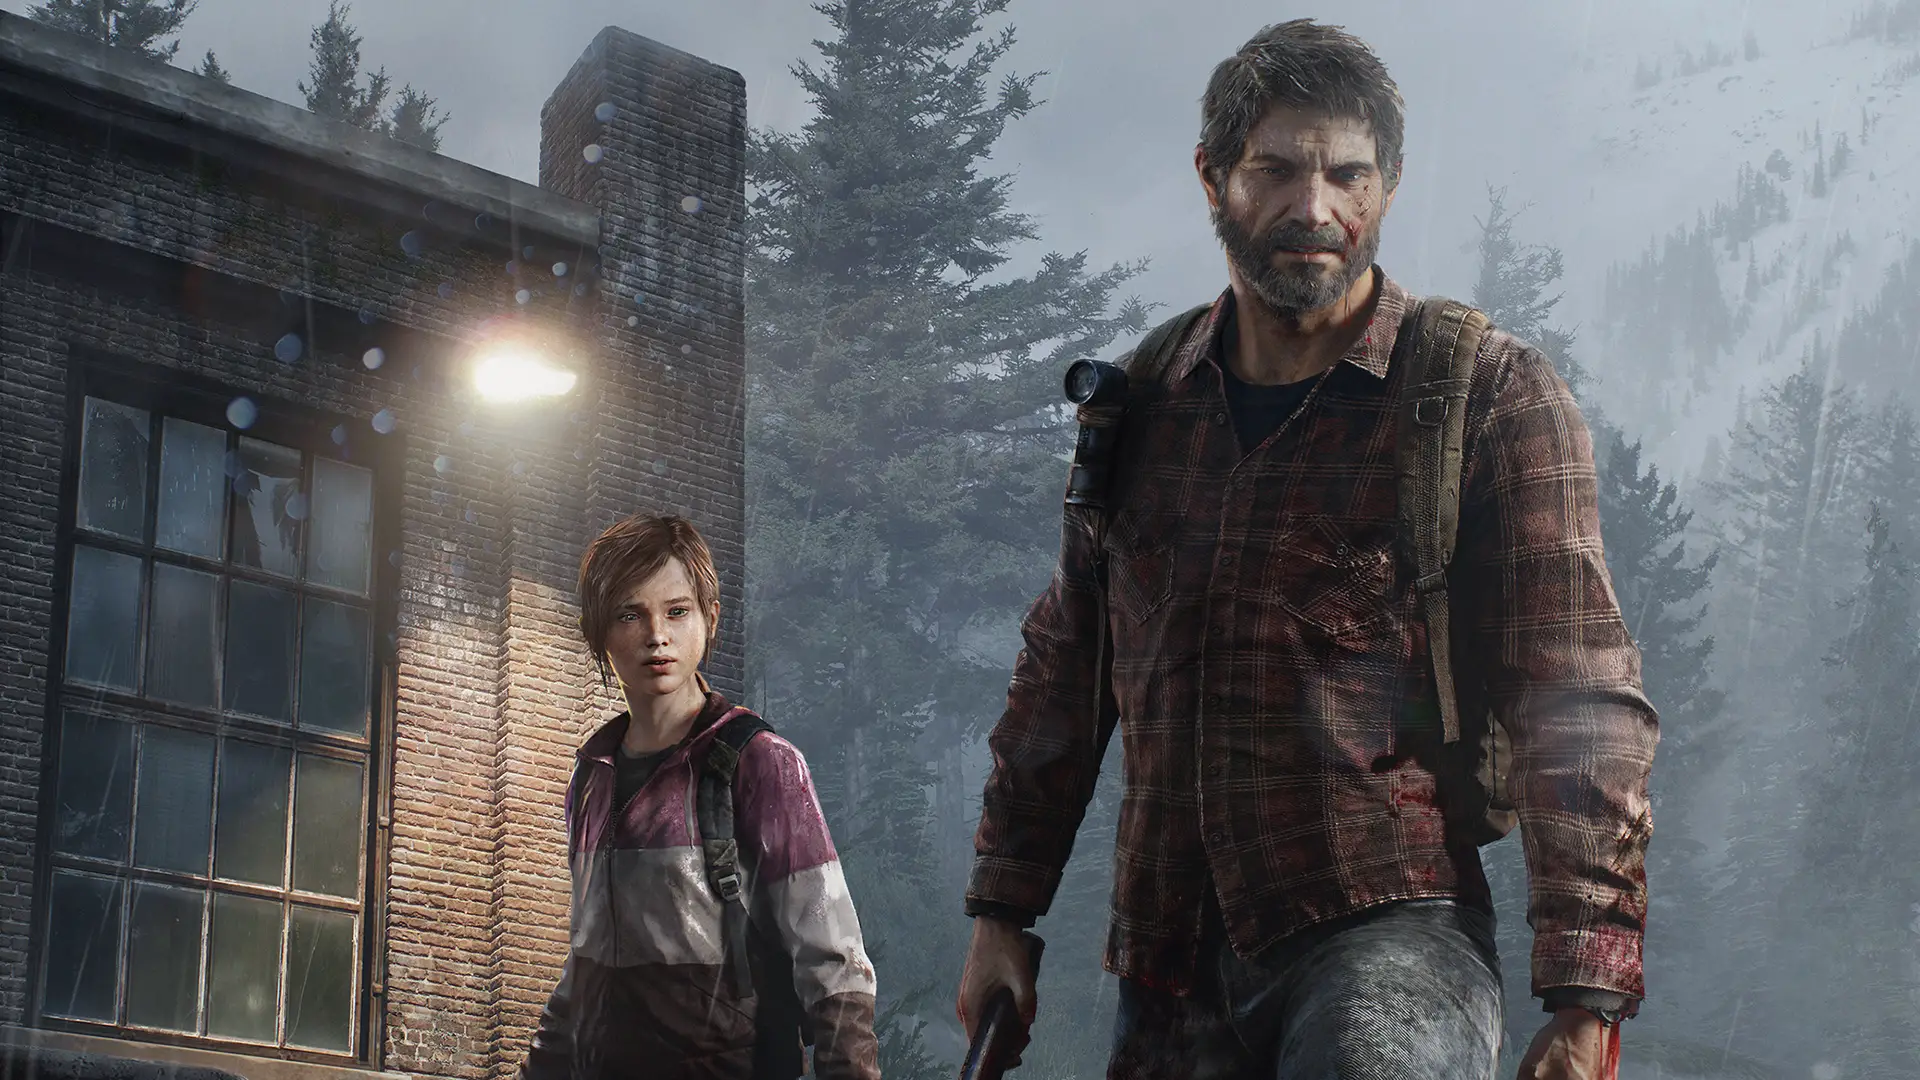 The Last Of Us Part II Theme for Windows 10 & 11